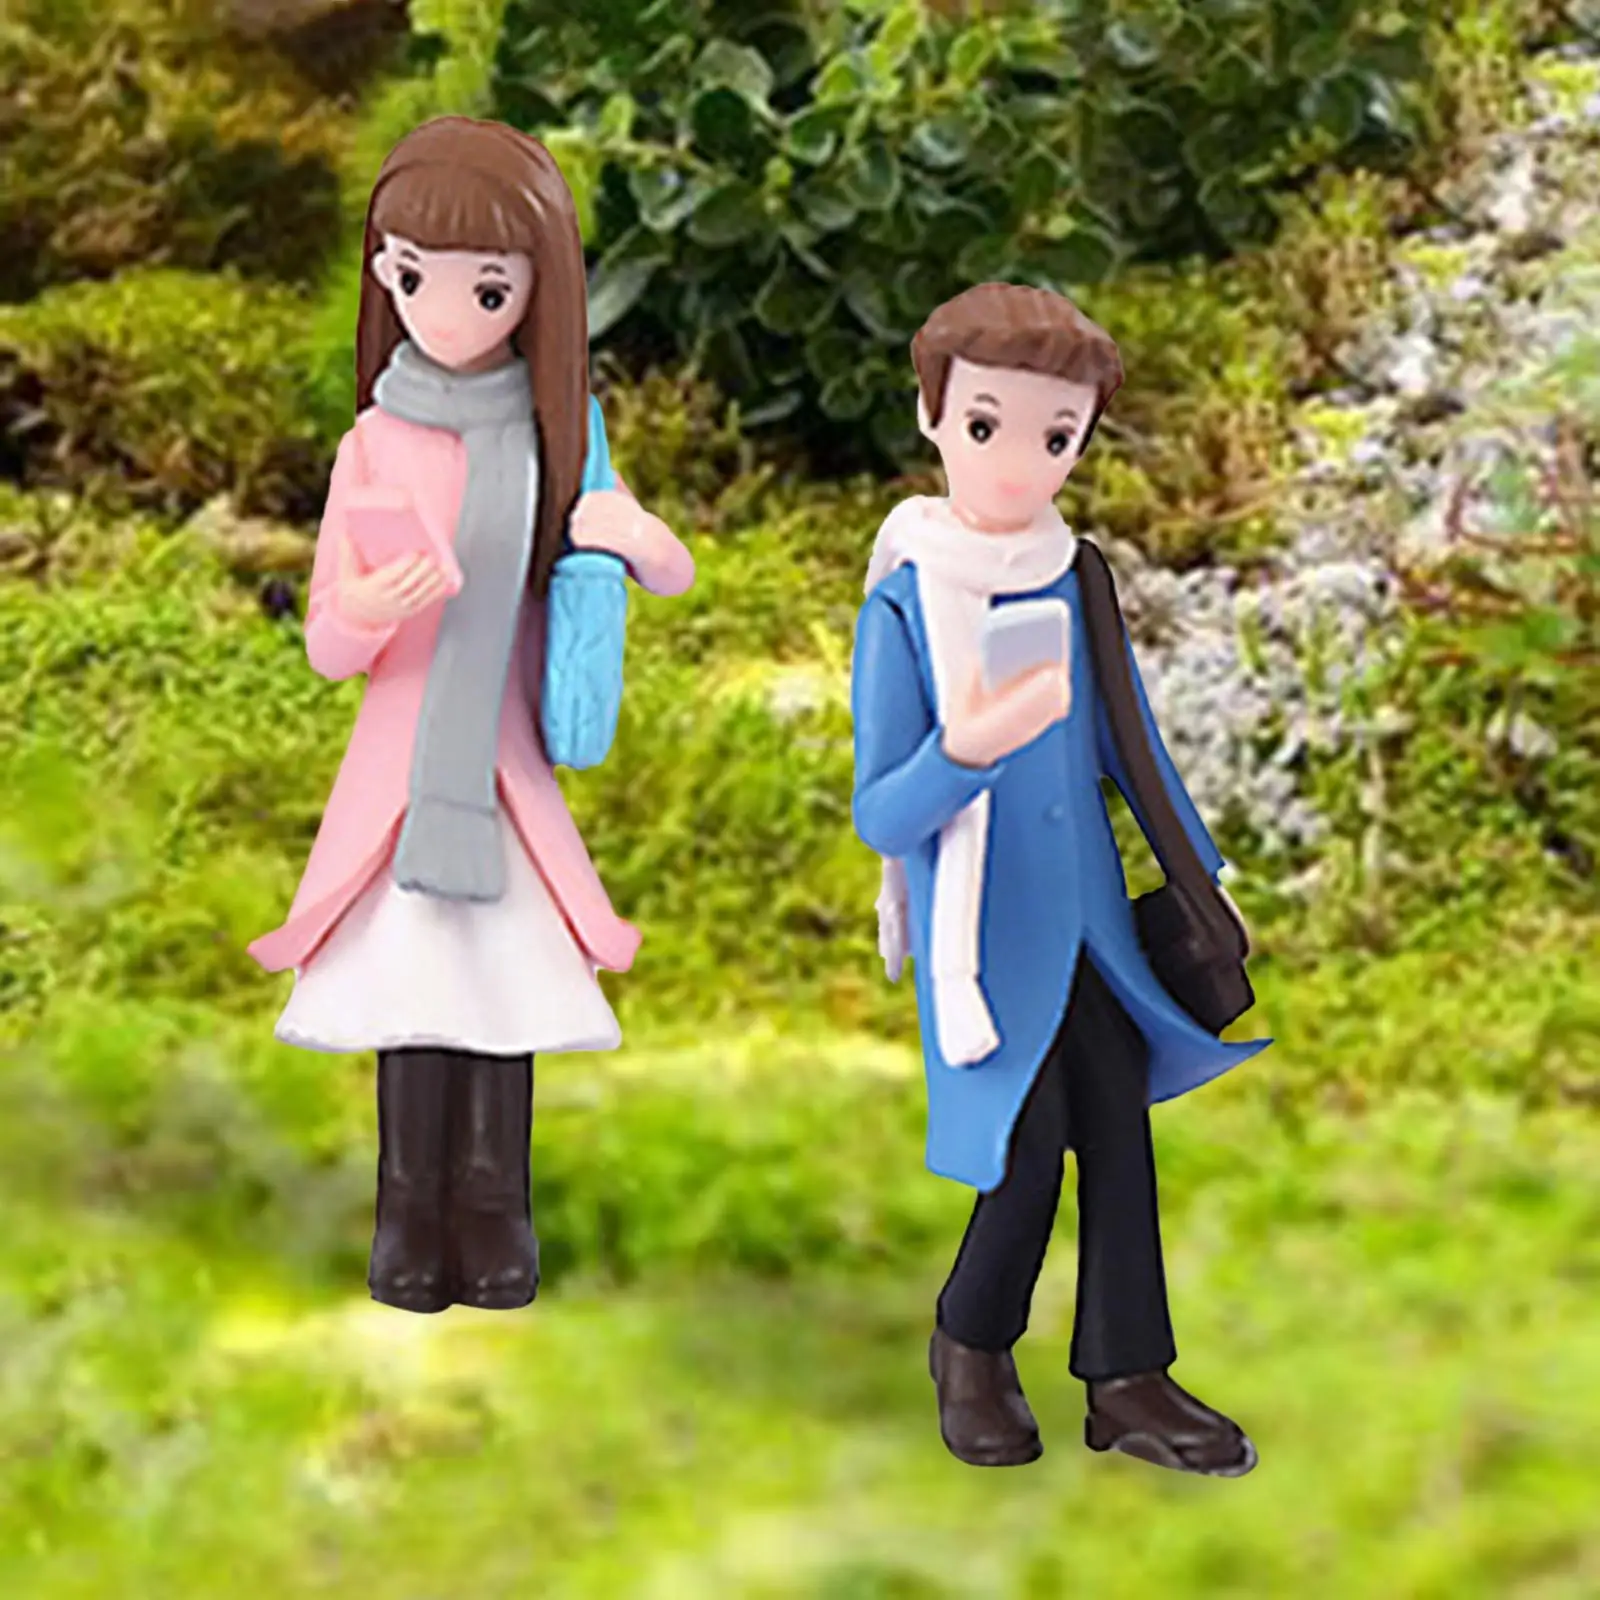 Phone Couple Miniature Realistic Collectibles Delicate People Figurines for Dollhouse Diorama Photography Props DIY Scene Layout